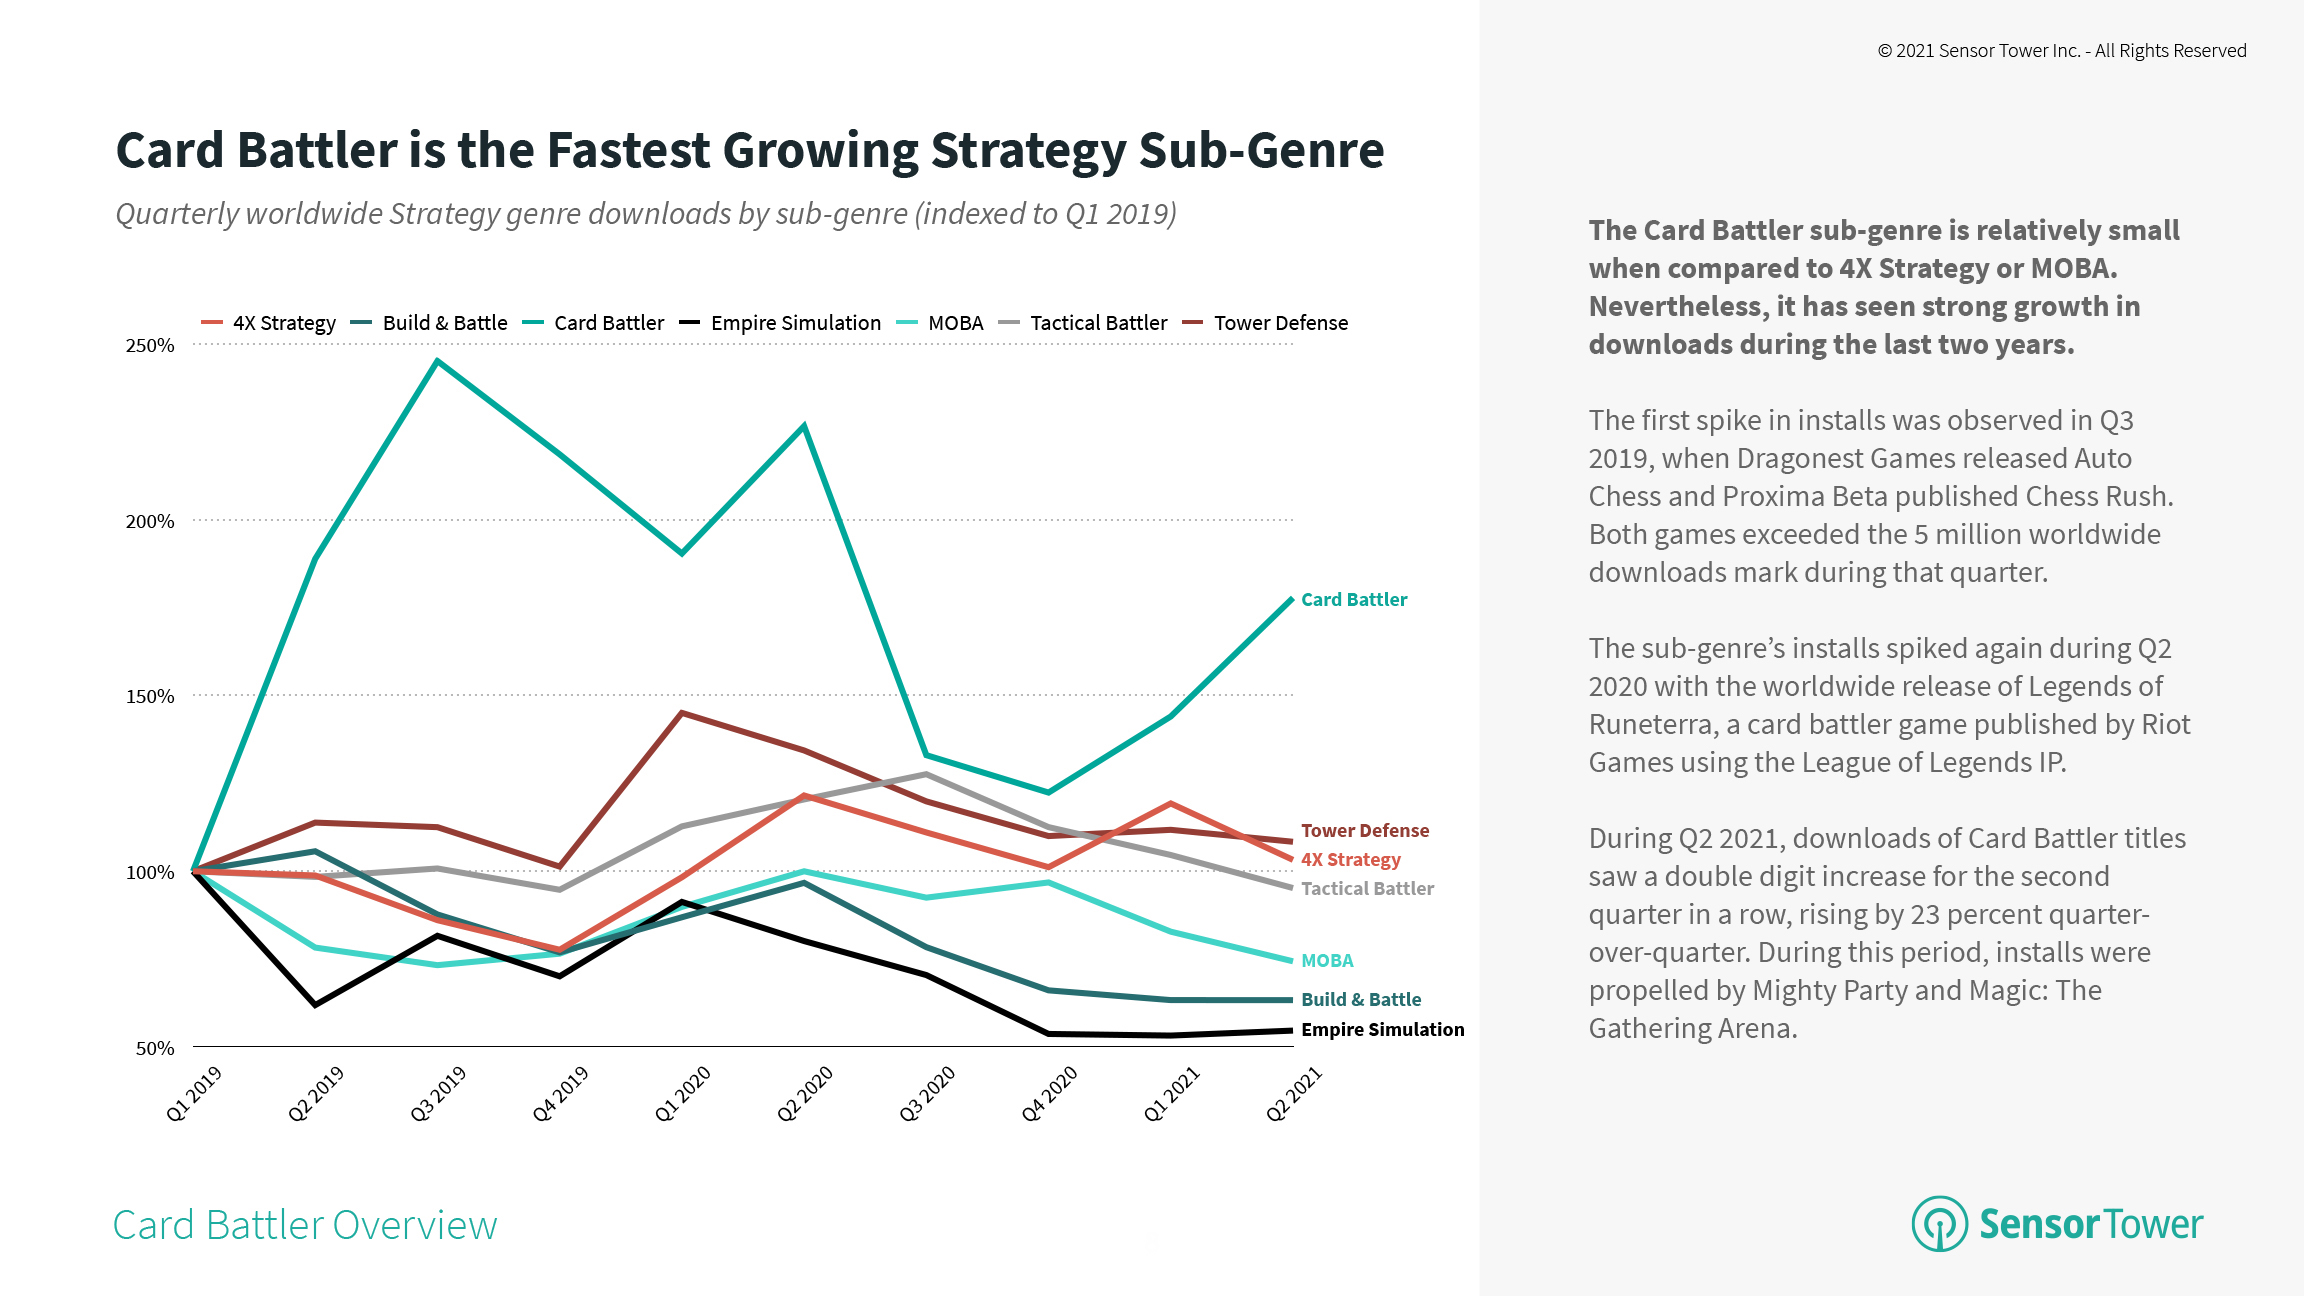 Quarterly Strategy Game Downloads by Sub-Genre